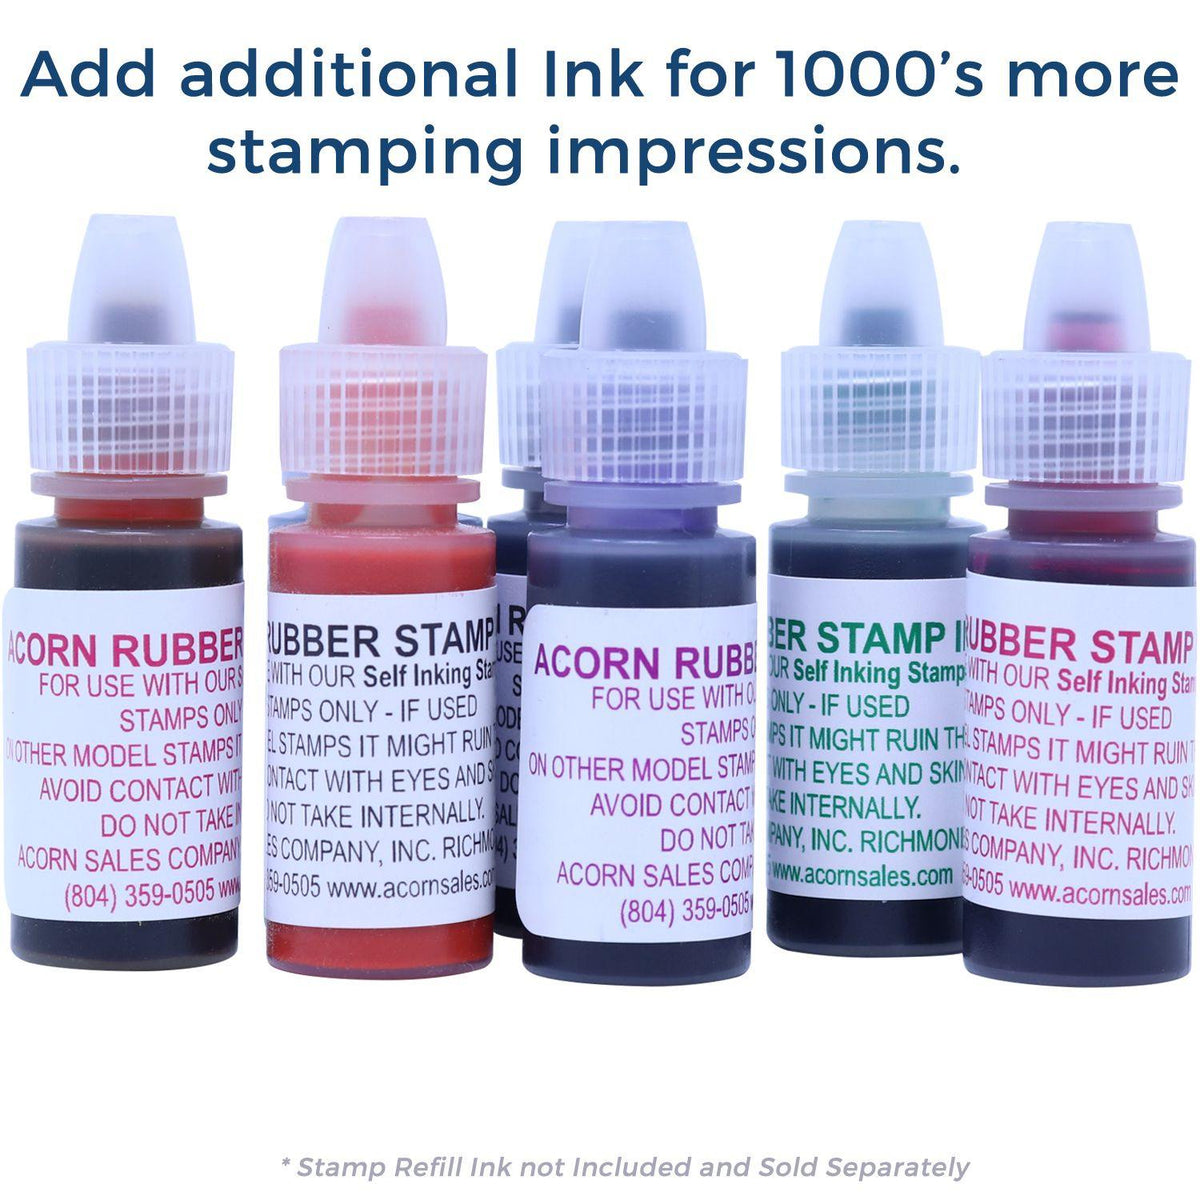 Refill Inks for Large Pre-Inked Narrow Font Return Receipt Requested Stamp Available